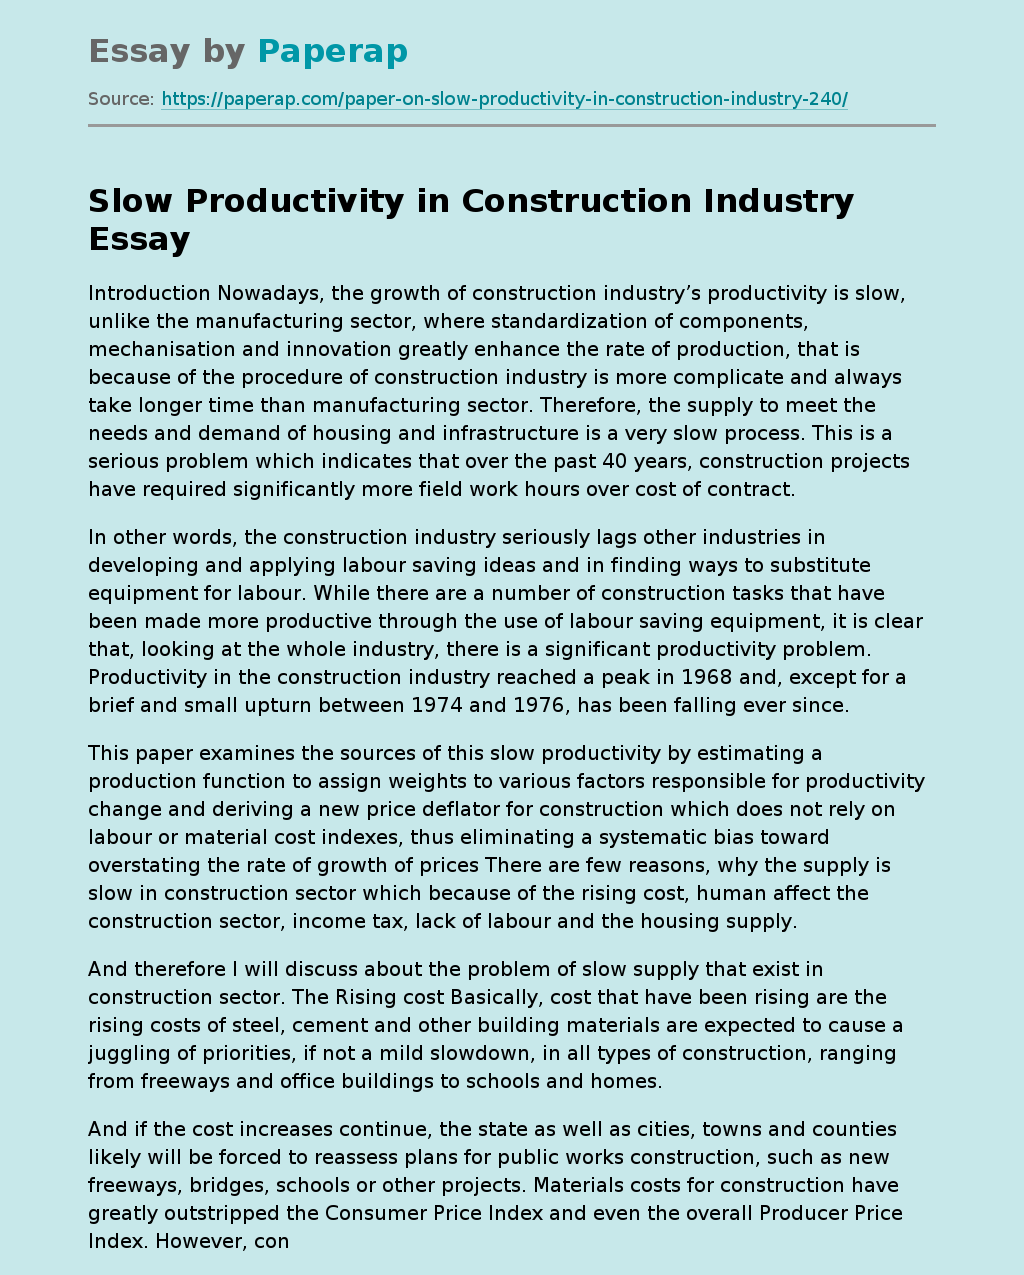 Slow Productivity in Construction Industry